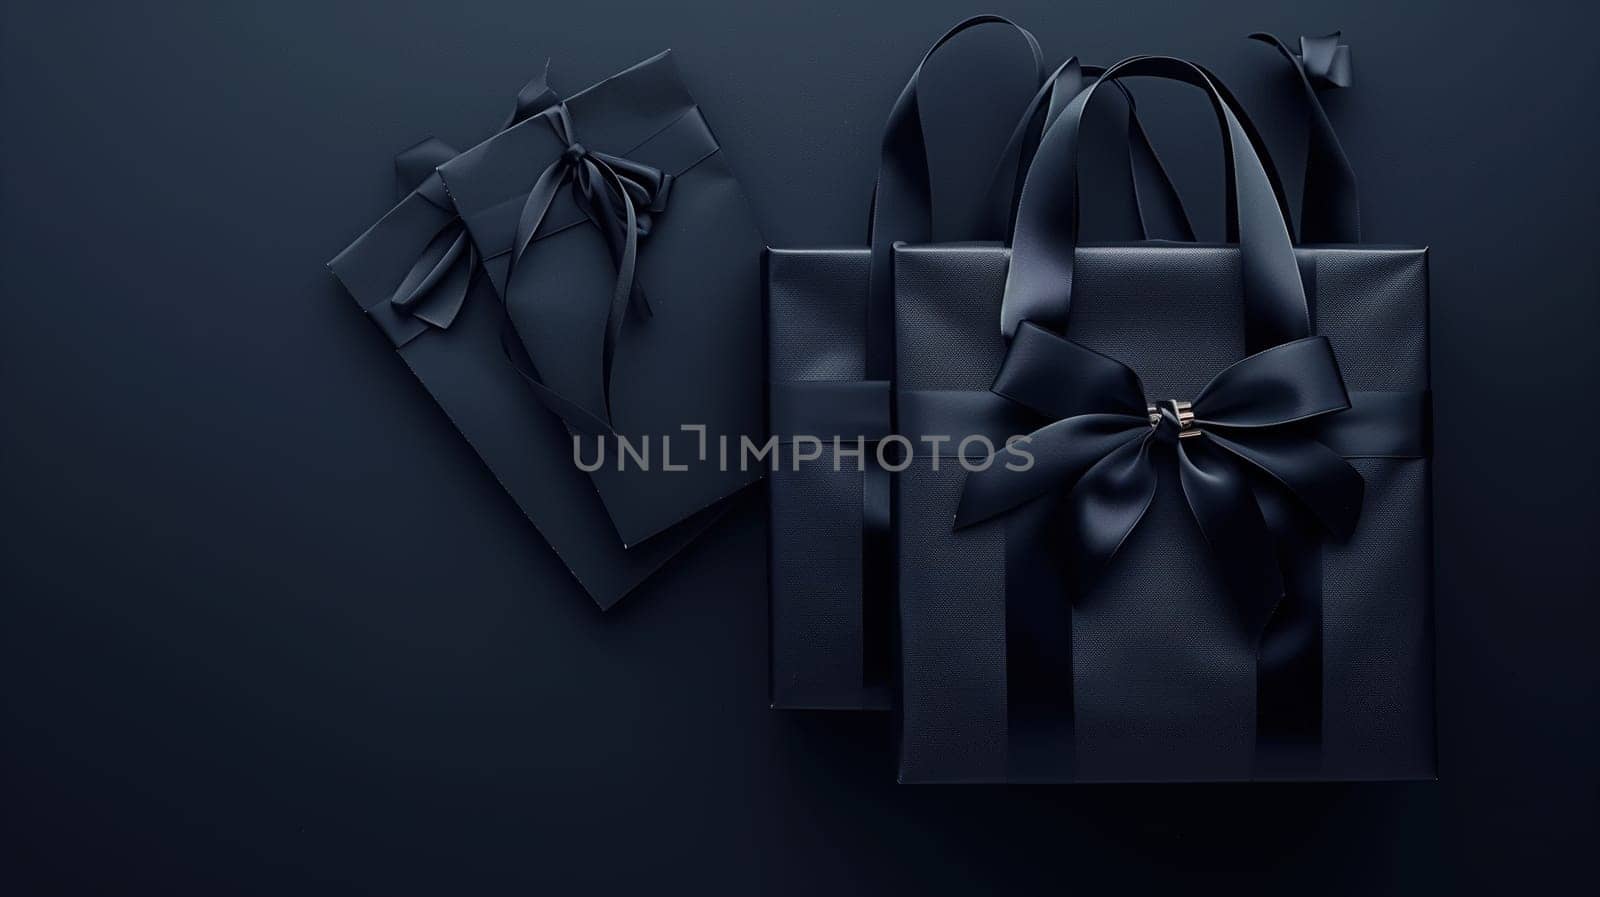 A blue bag with a decorative bow on it, perfect for adding a touch of elegance to your outfit. This accessory is ideal for those looking for a stylish and chic option during the Black Friday sale.